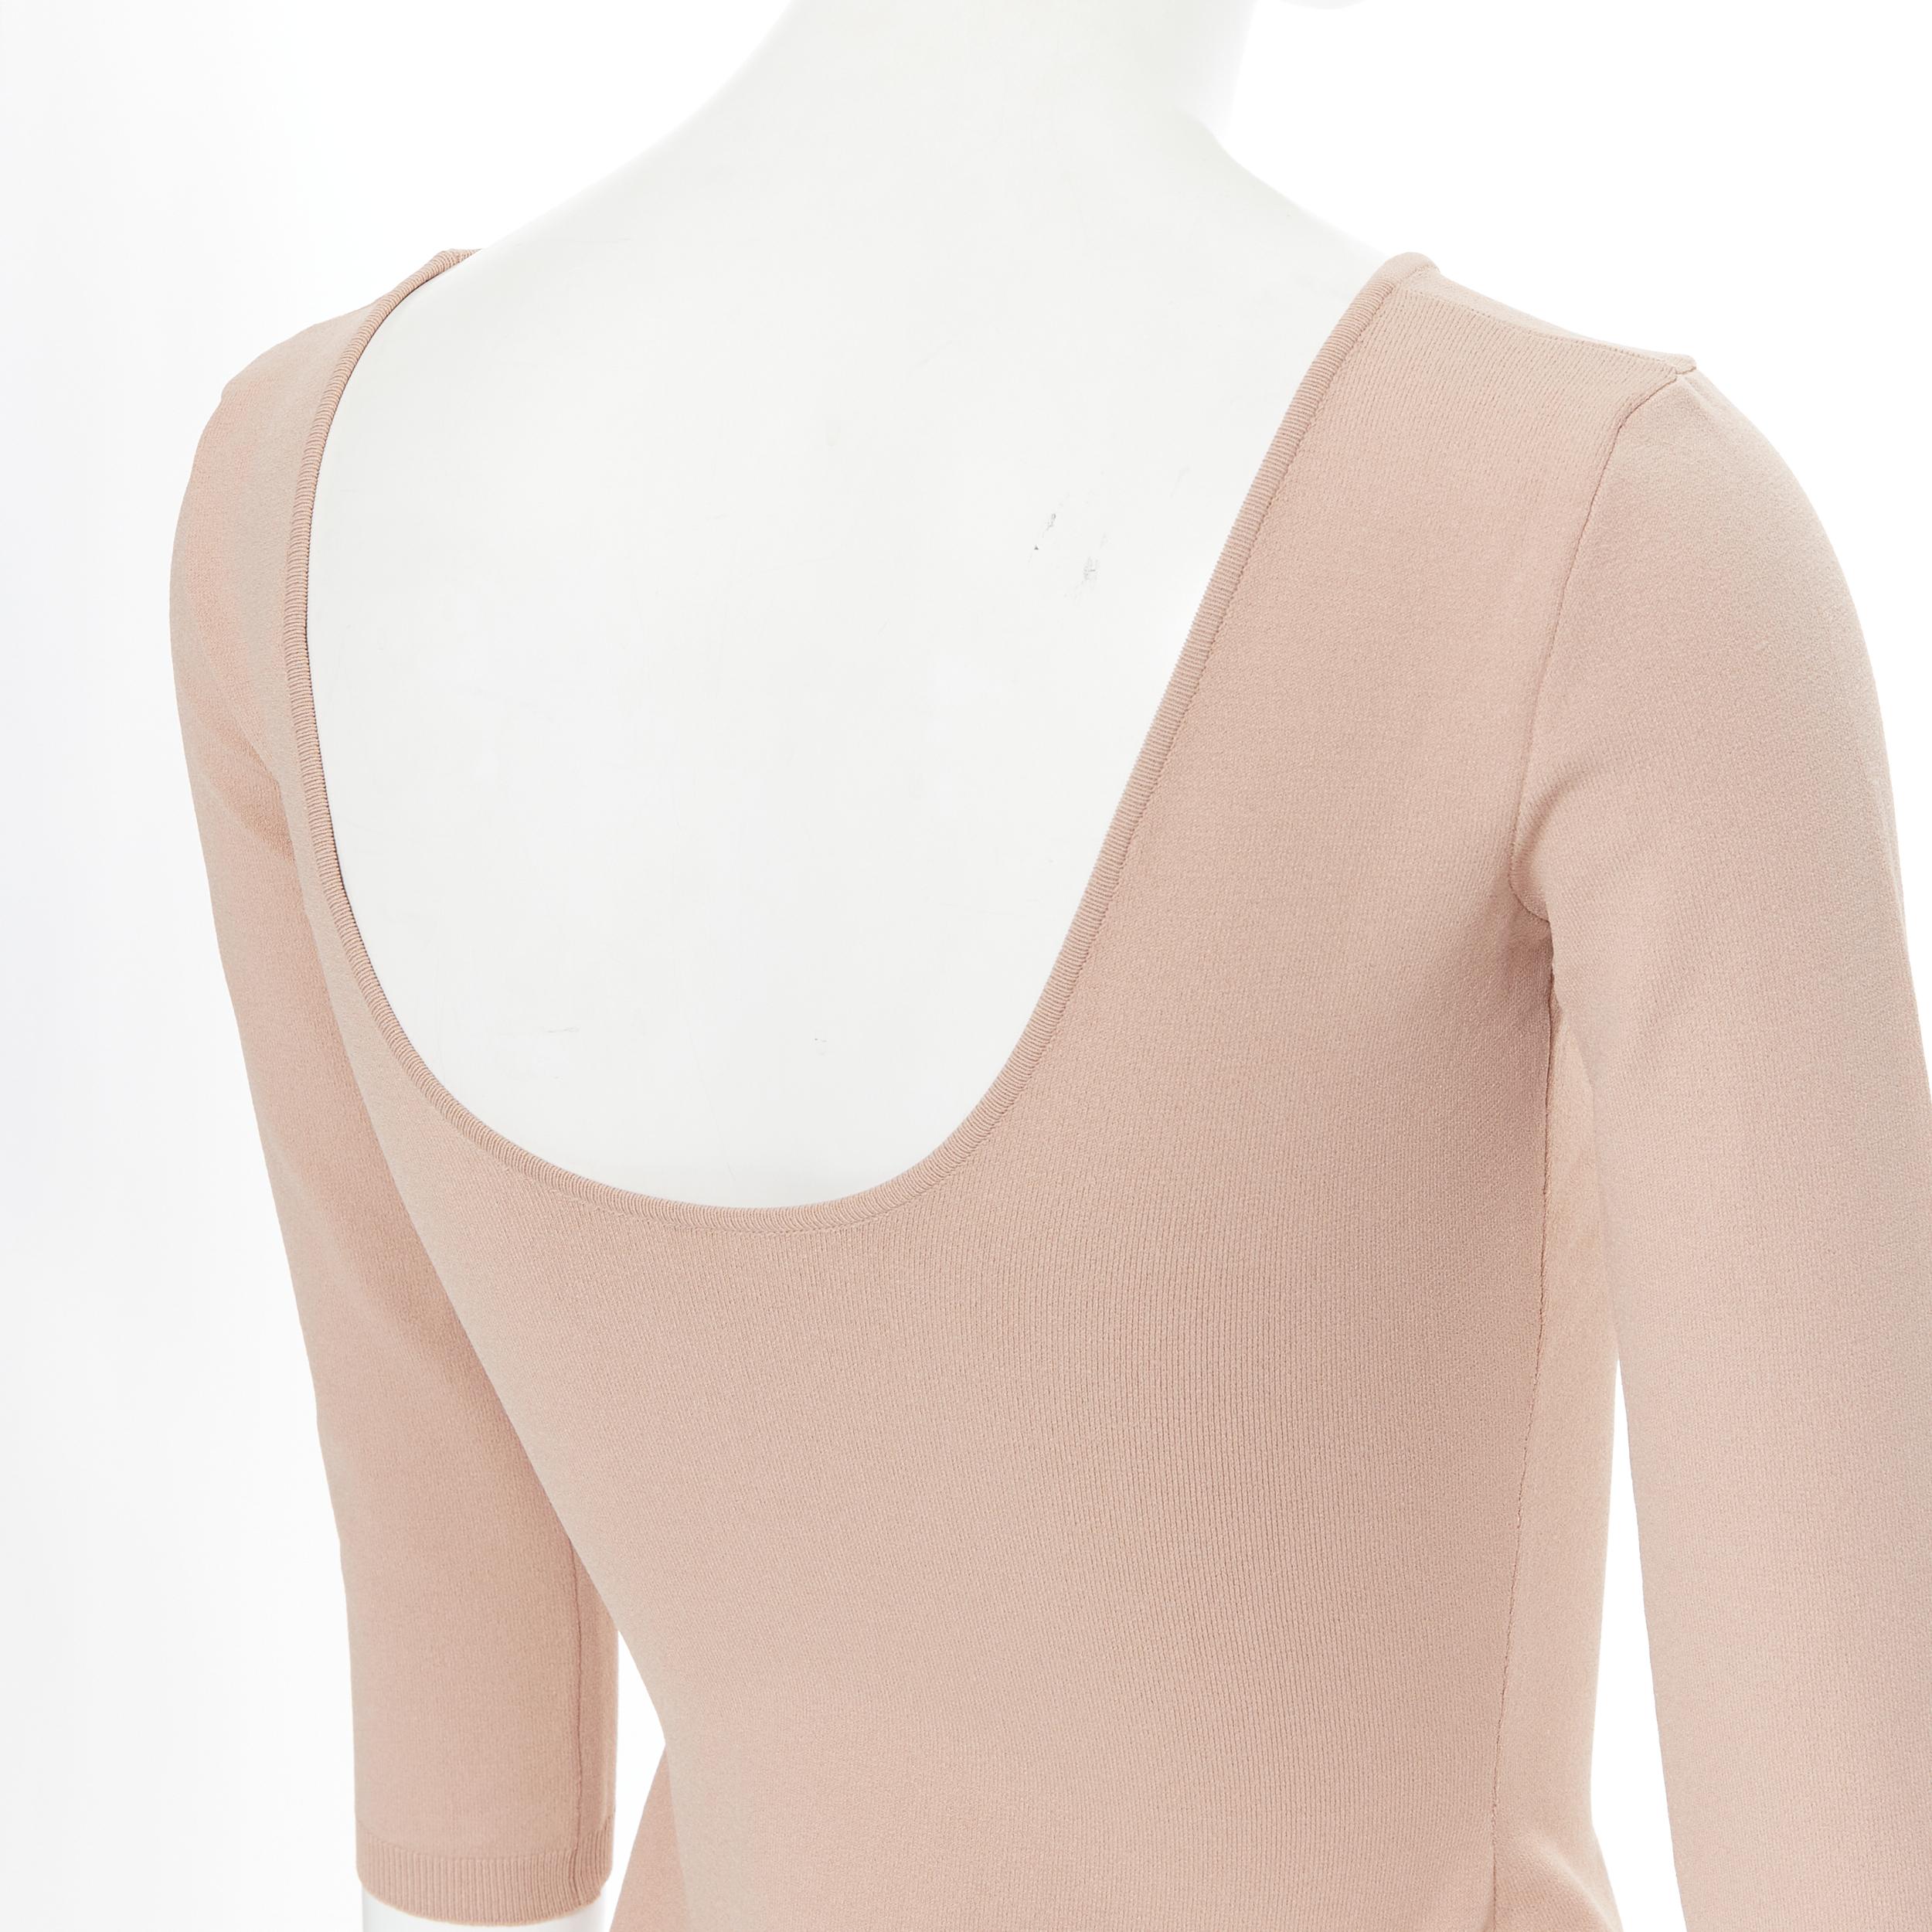 VALENTINO nude beige viscose knit U-neck 3/4 sleeve bodycon stretch top S 
Reference: LNKO/A01727 
Brand: Valentino 
Material: Viscose 
Color: Beige 
Pattern: Solid 
Extra Detail: U-Neck. 3/4 sleeves. 
Made in: Italy 

CONDITION: 
Condition: Very